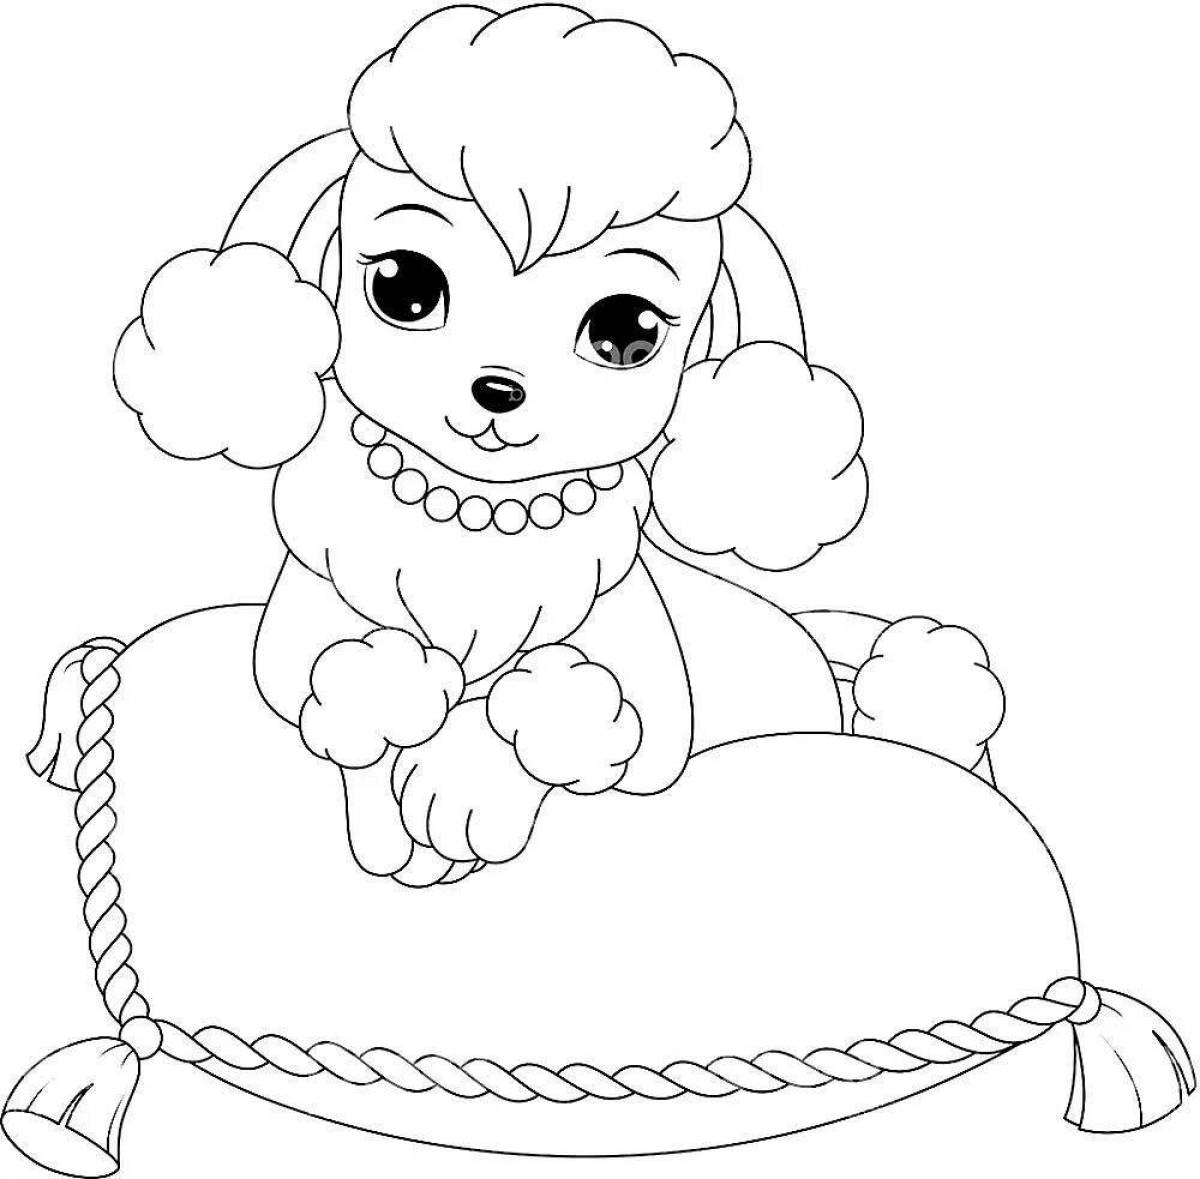 Snuggly coloring page toy poodle